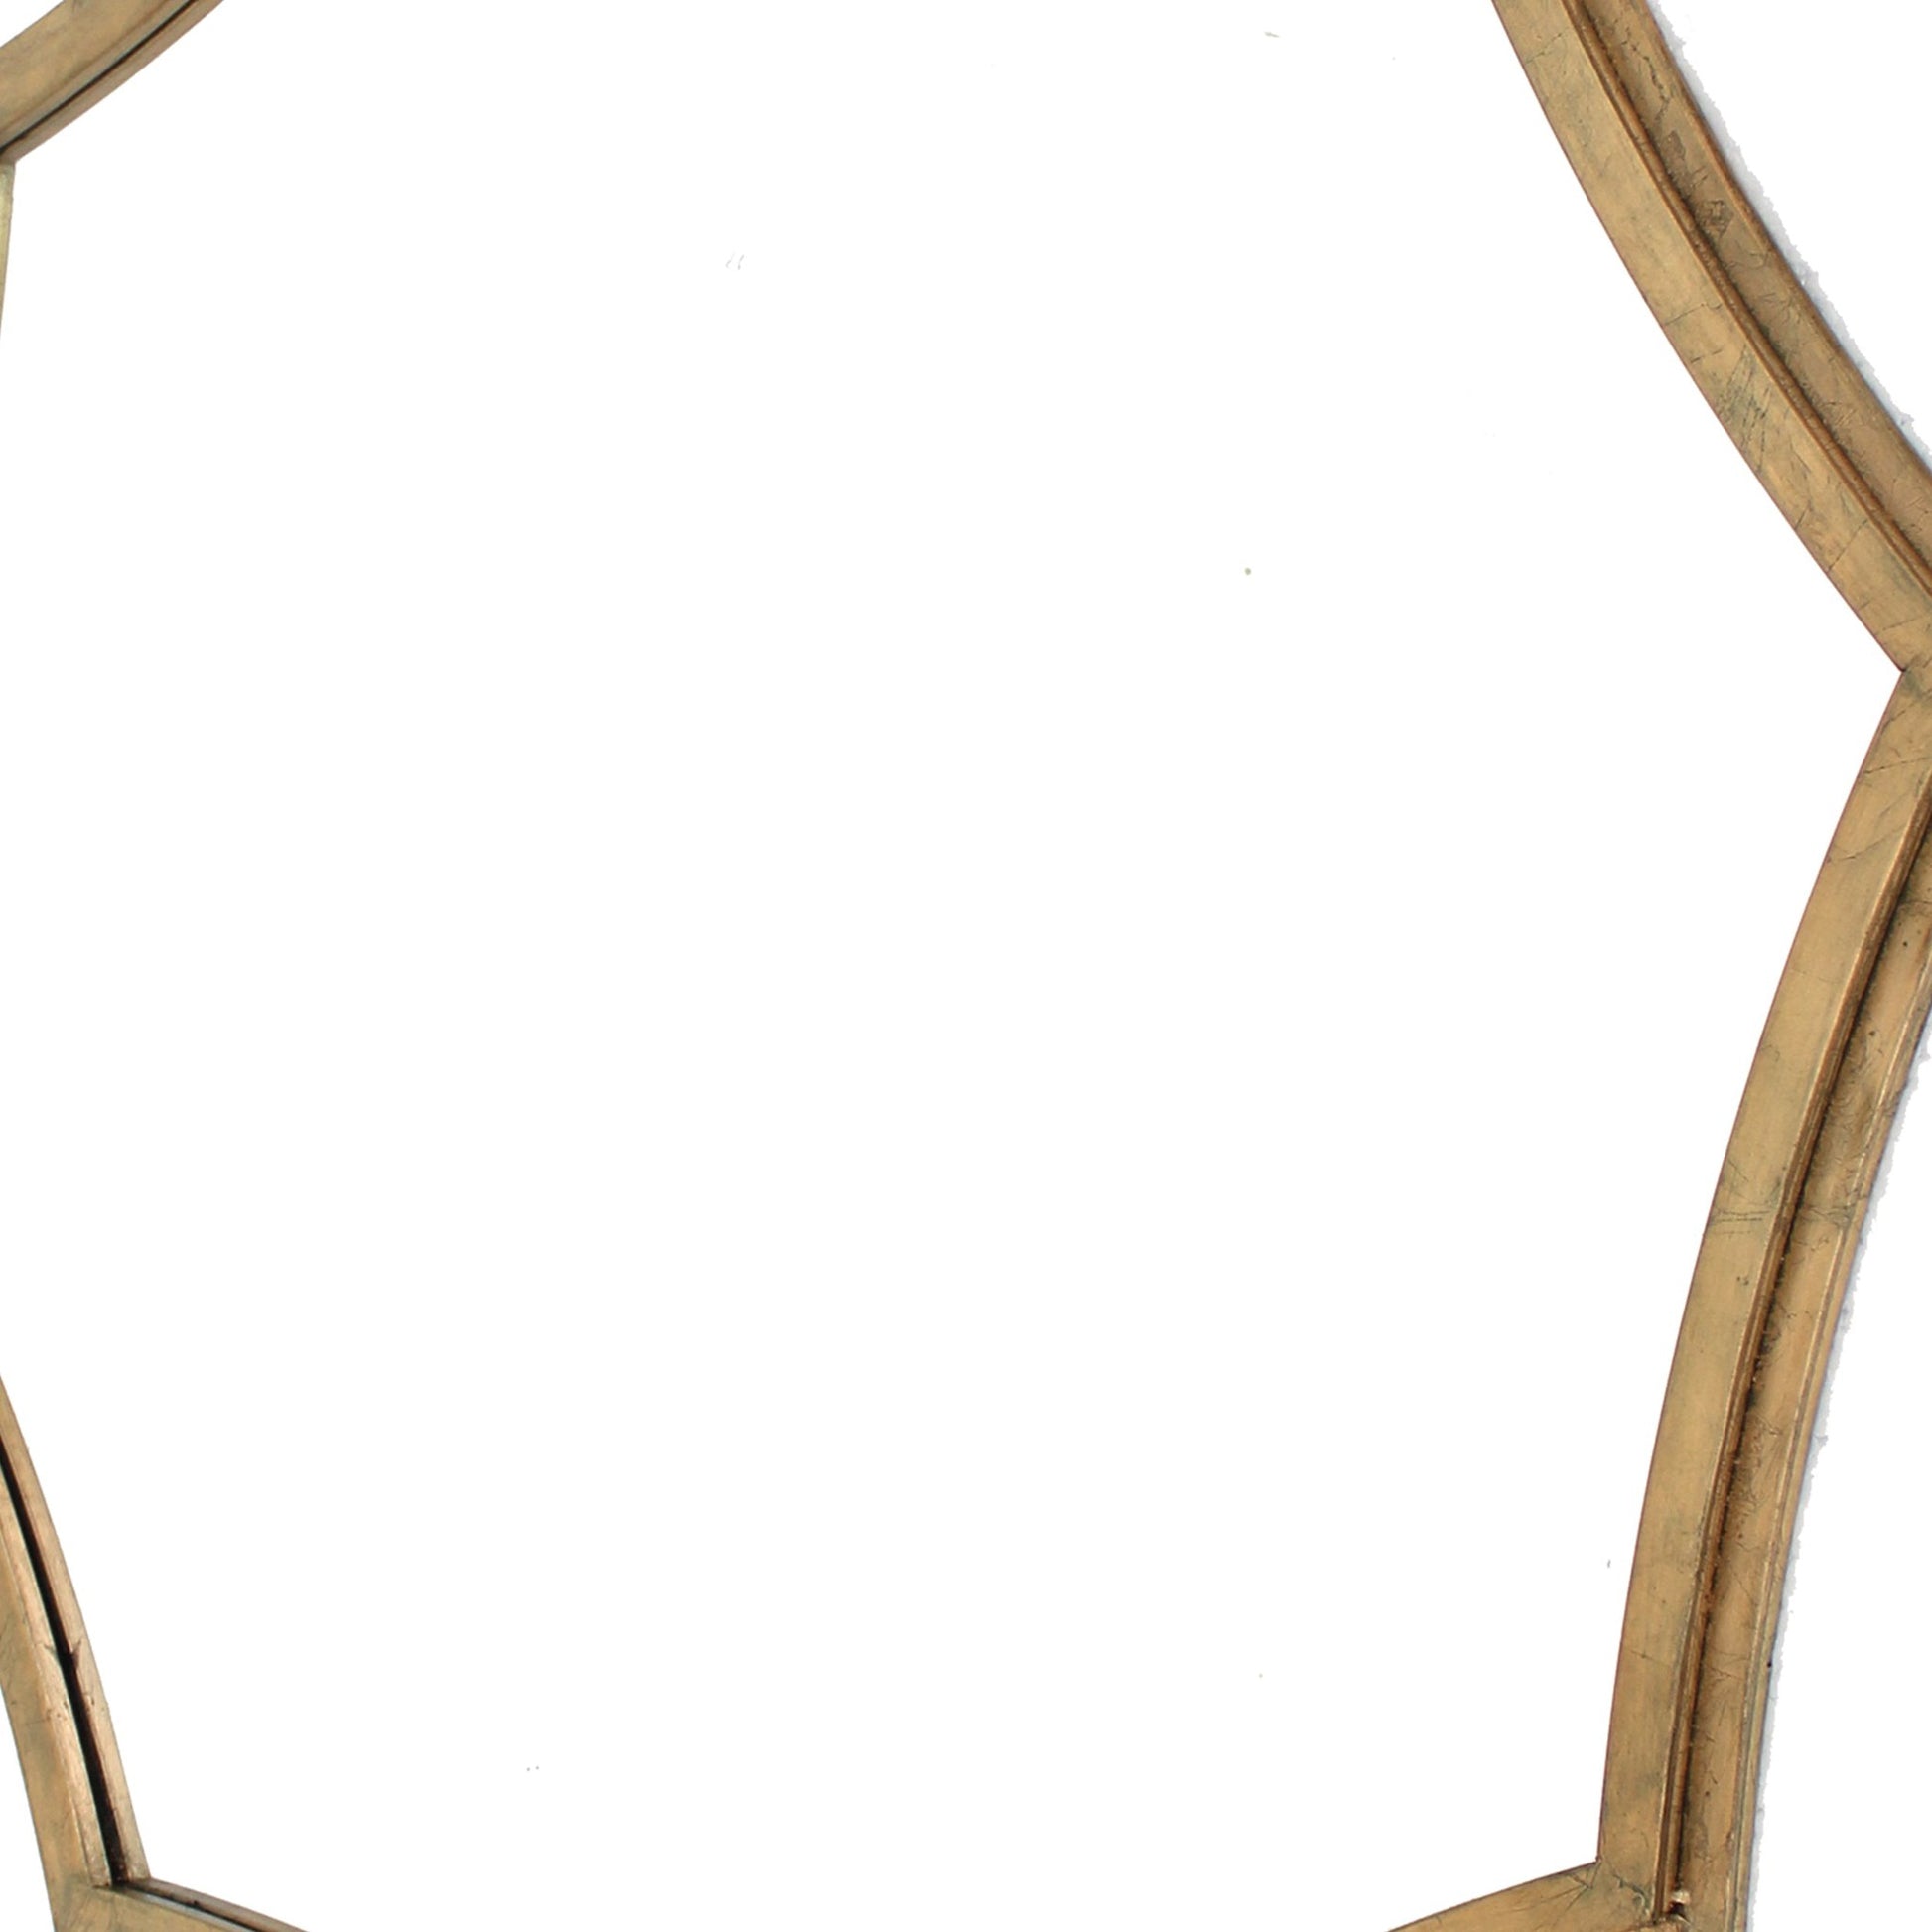 Benzara Brown Wooden Wall Mirror with Curved Hexagram Shape Frame